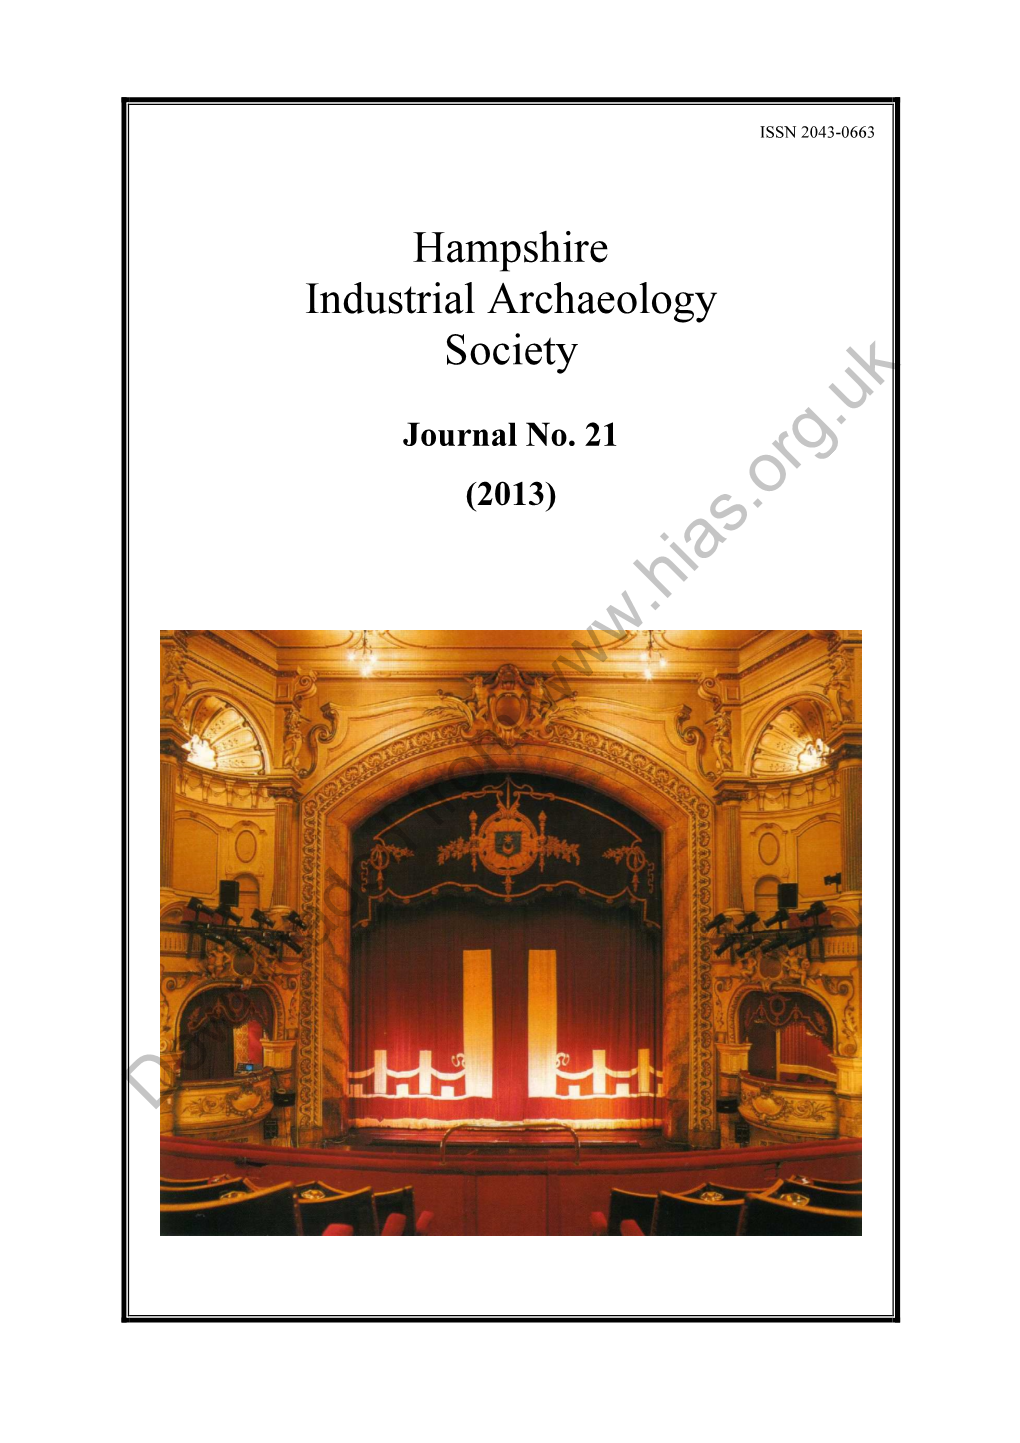 Hampshire Industrial Archaeology Society, Journal No. 21, 2013, Part 1